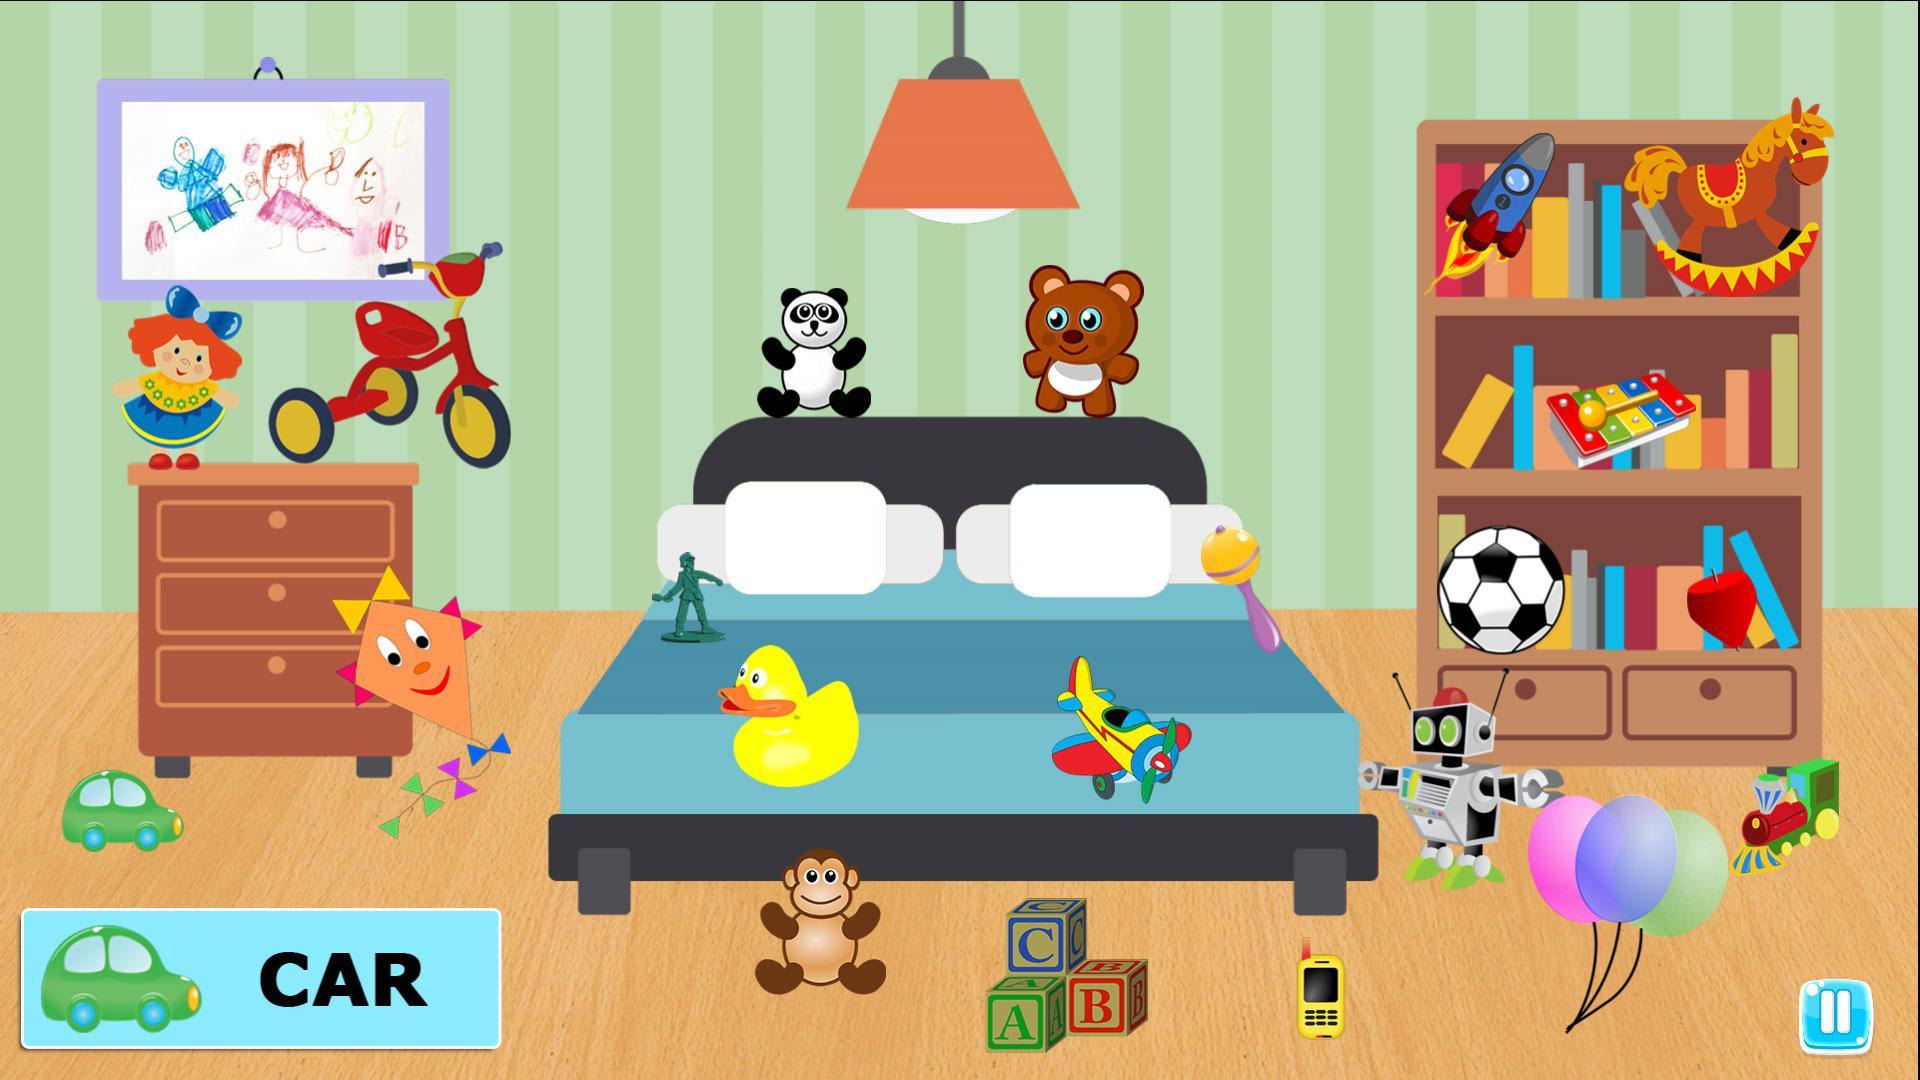 Find Objects Game for Kids for Android - APK Download